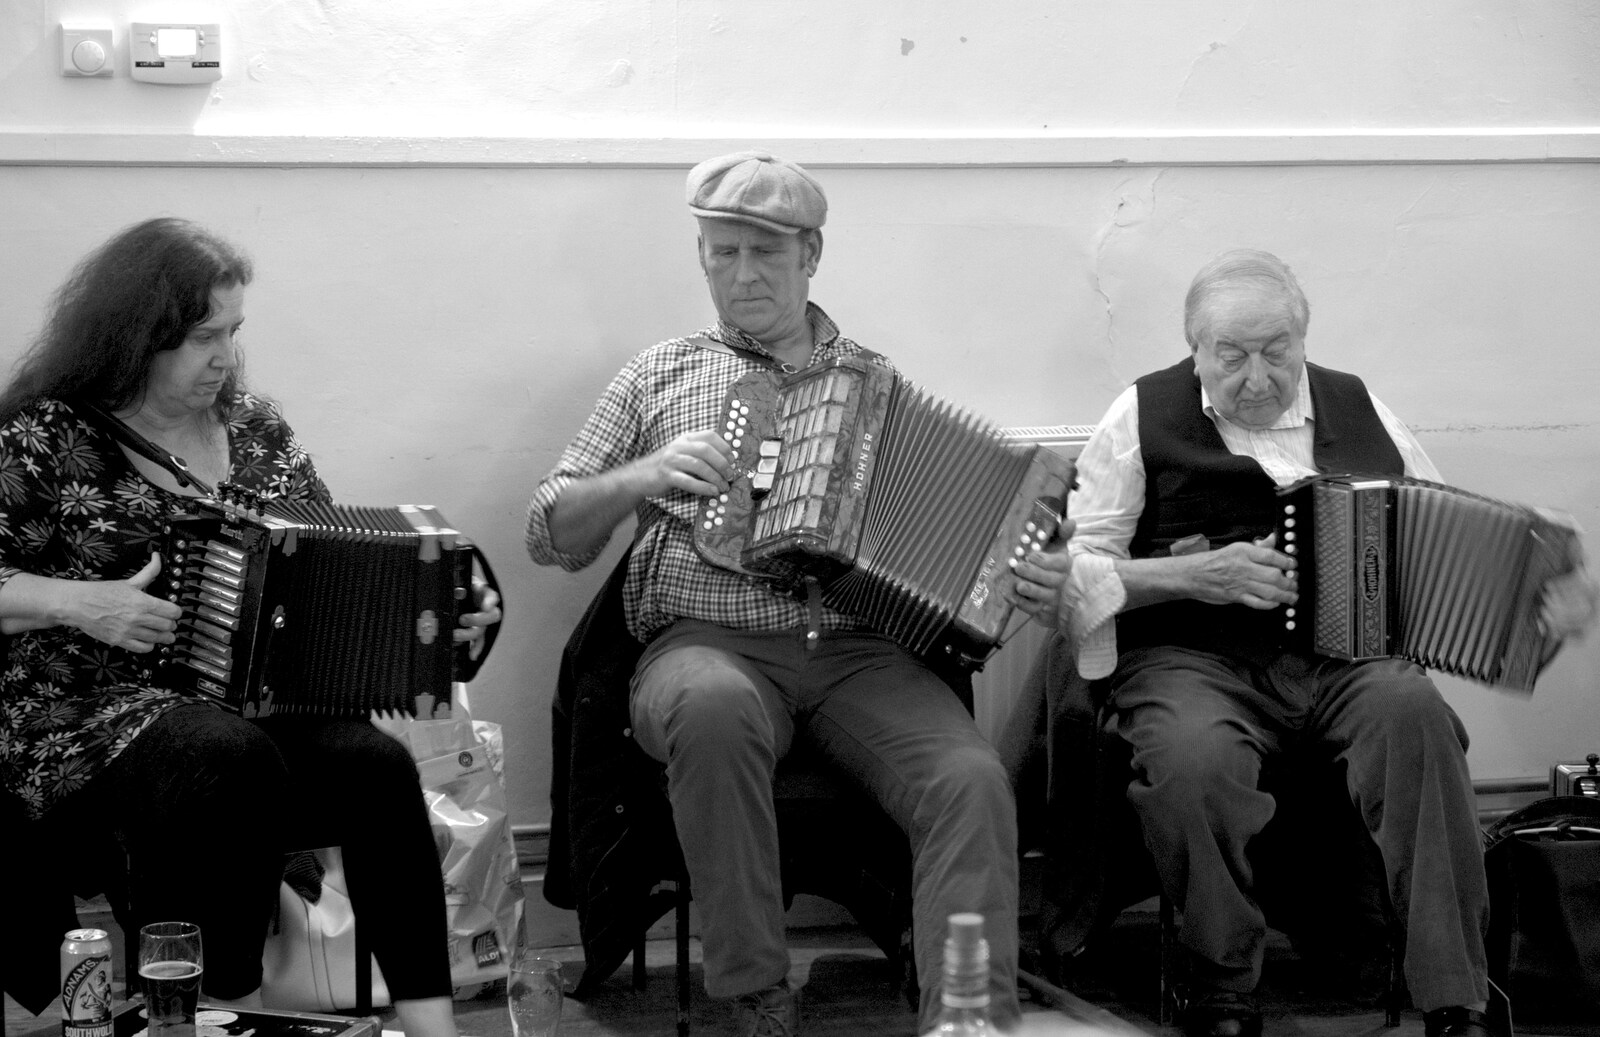 The three accordions from Big Steve's Music Night, The Village Hall, Brome, Suffolk - 6th October 2018